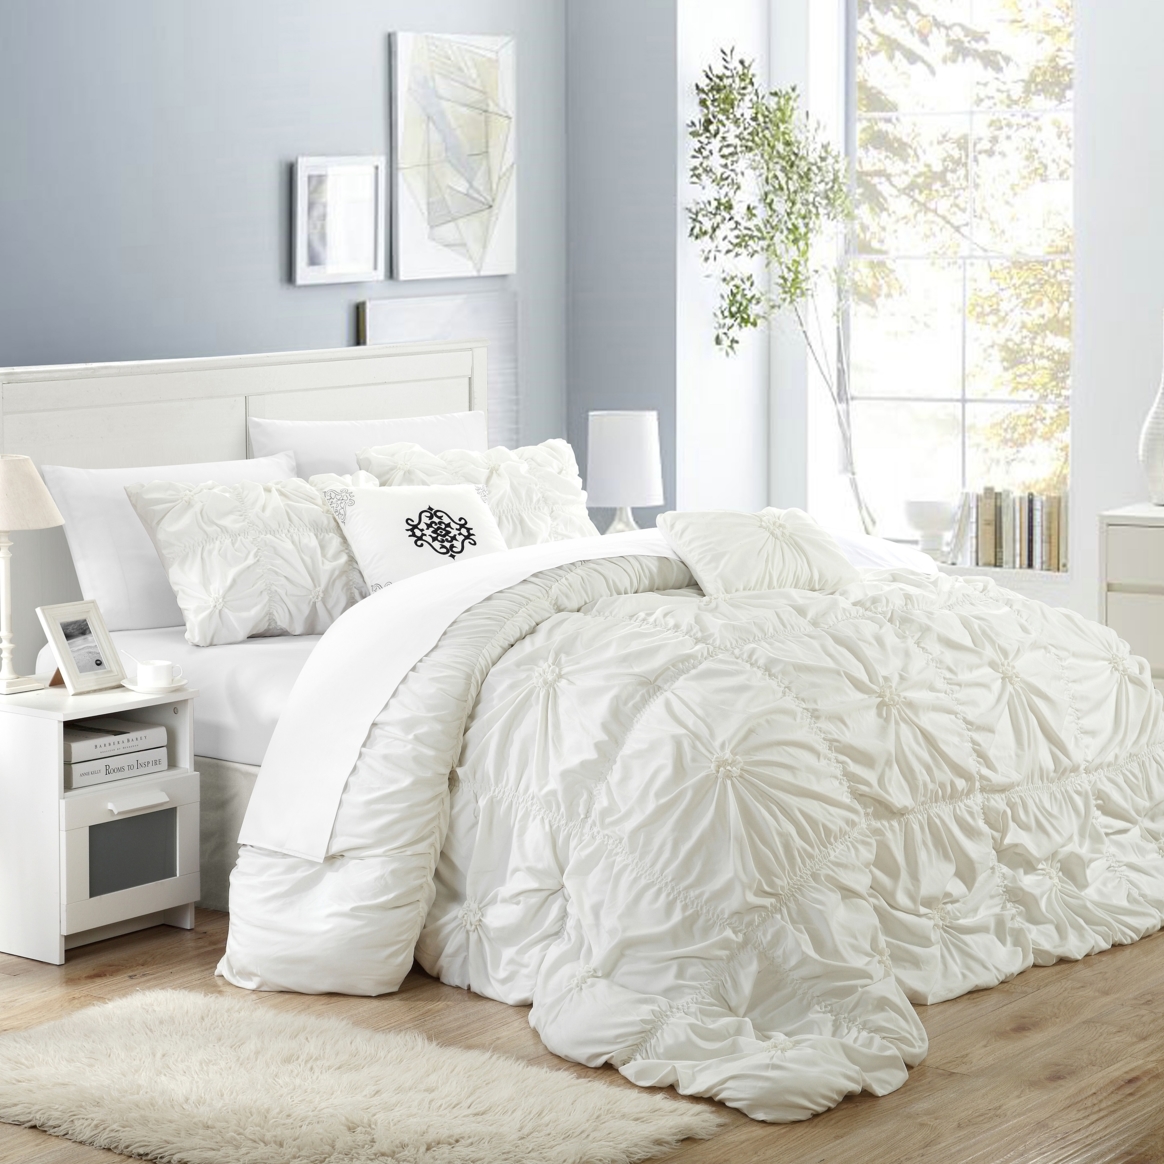 Hilton 10 Piece Comforter Set Floral Pinch Pleated Ruffled Designer Embellished Bed In A Bag Bedding - White, Queen